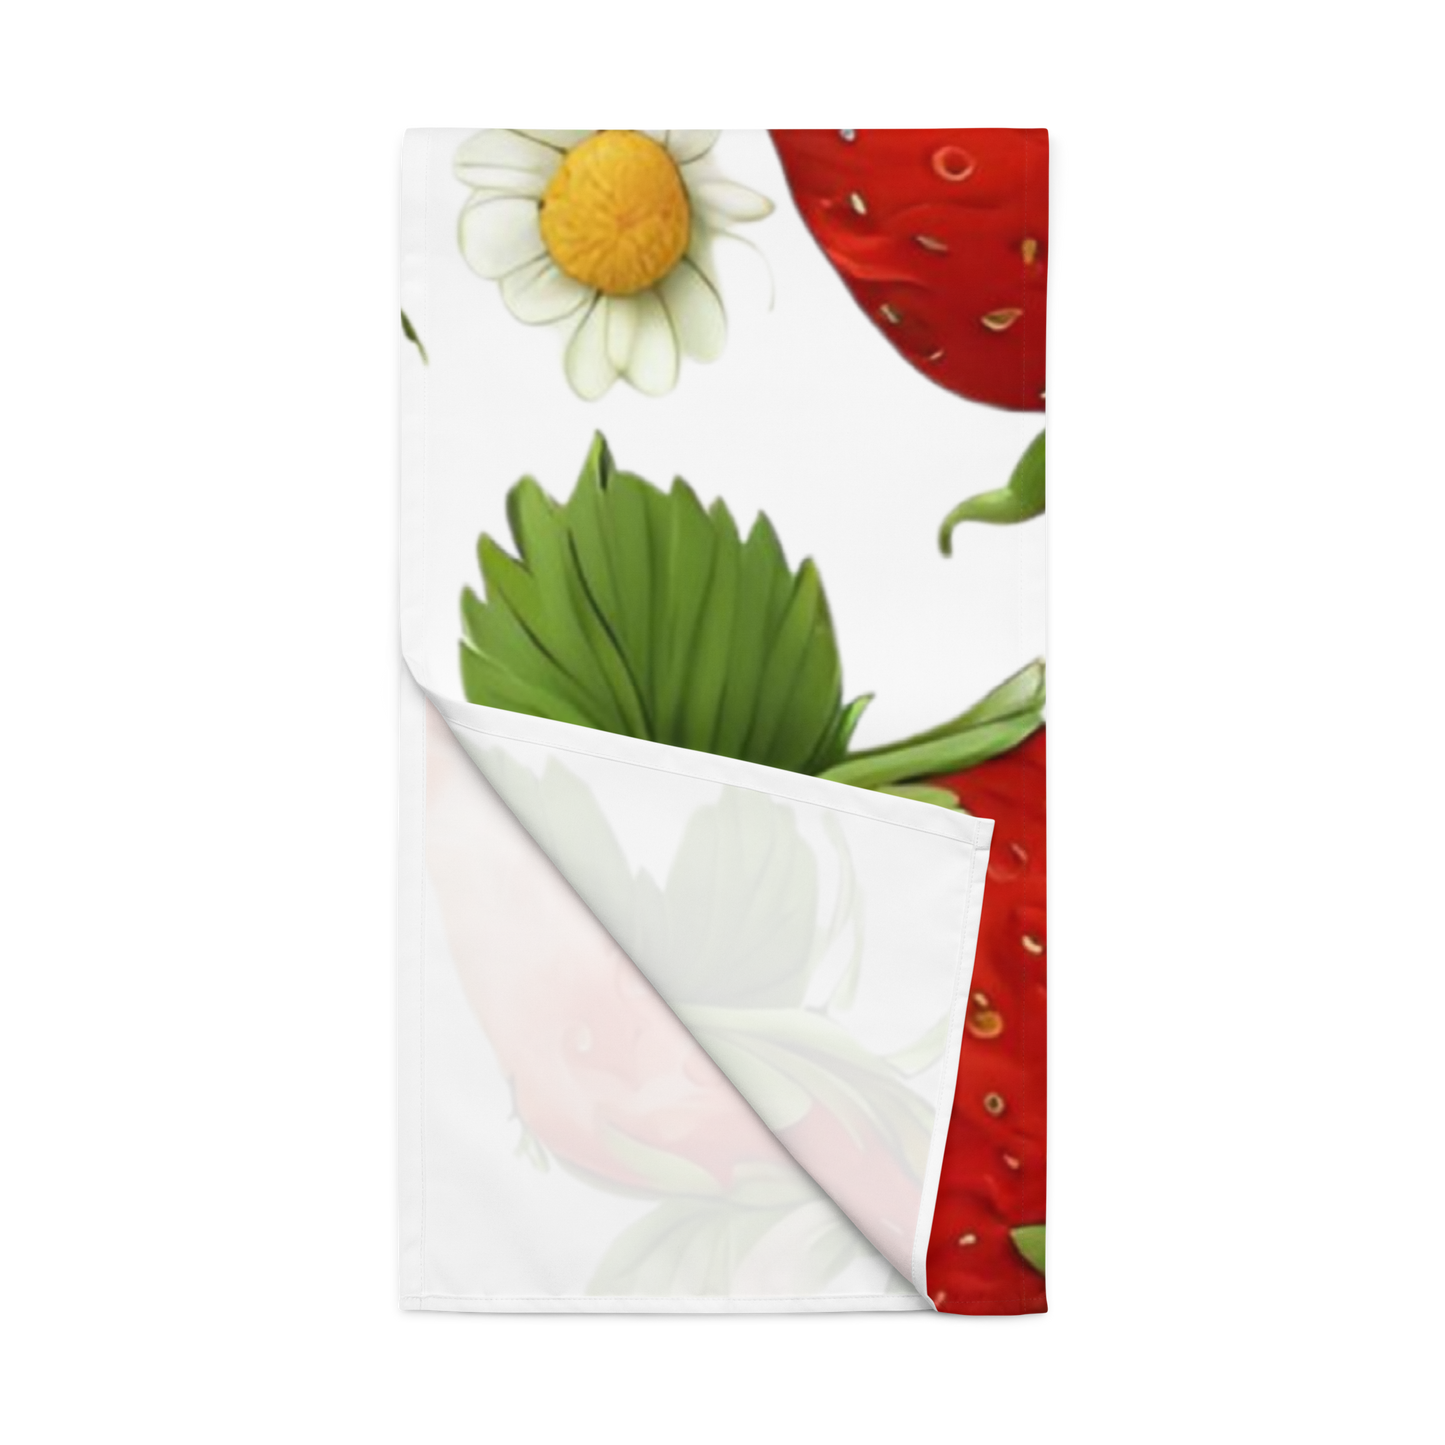 Strawberry Table runner, 90 x 16 inches ( 229 x 41 cm )